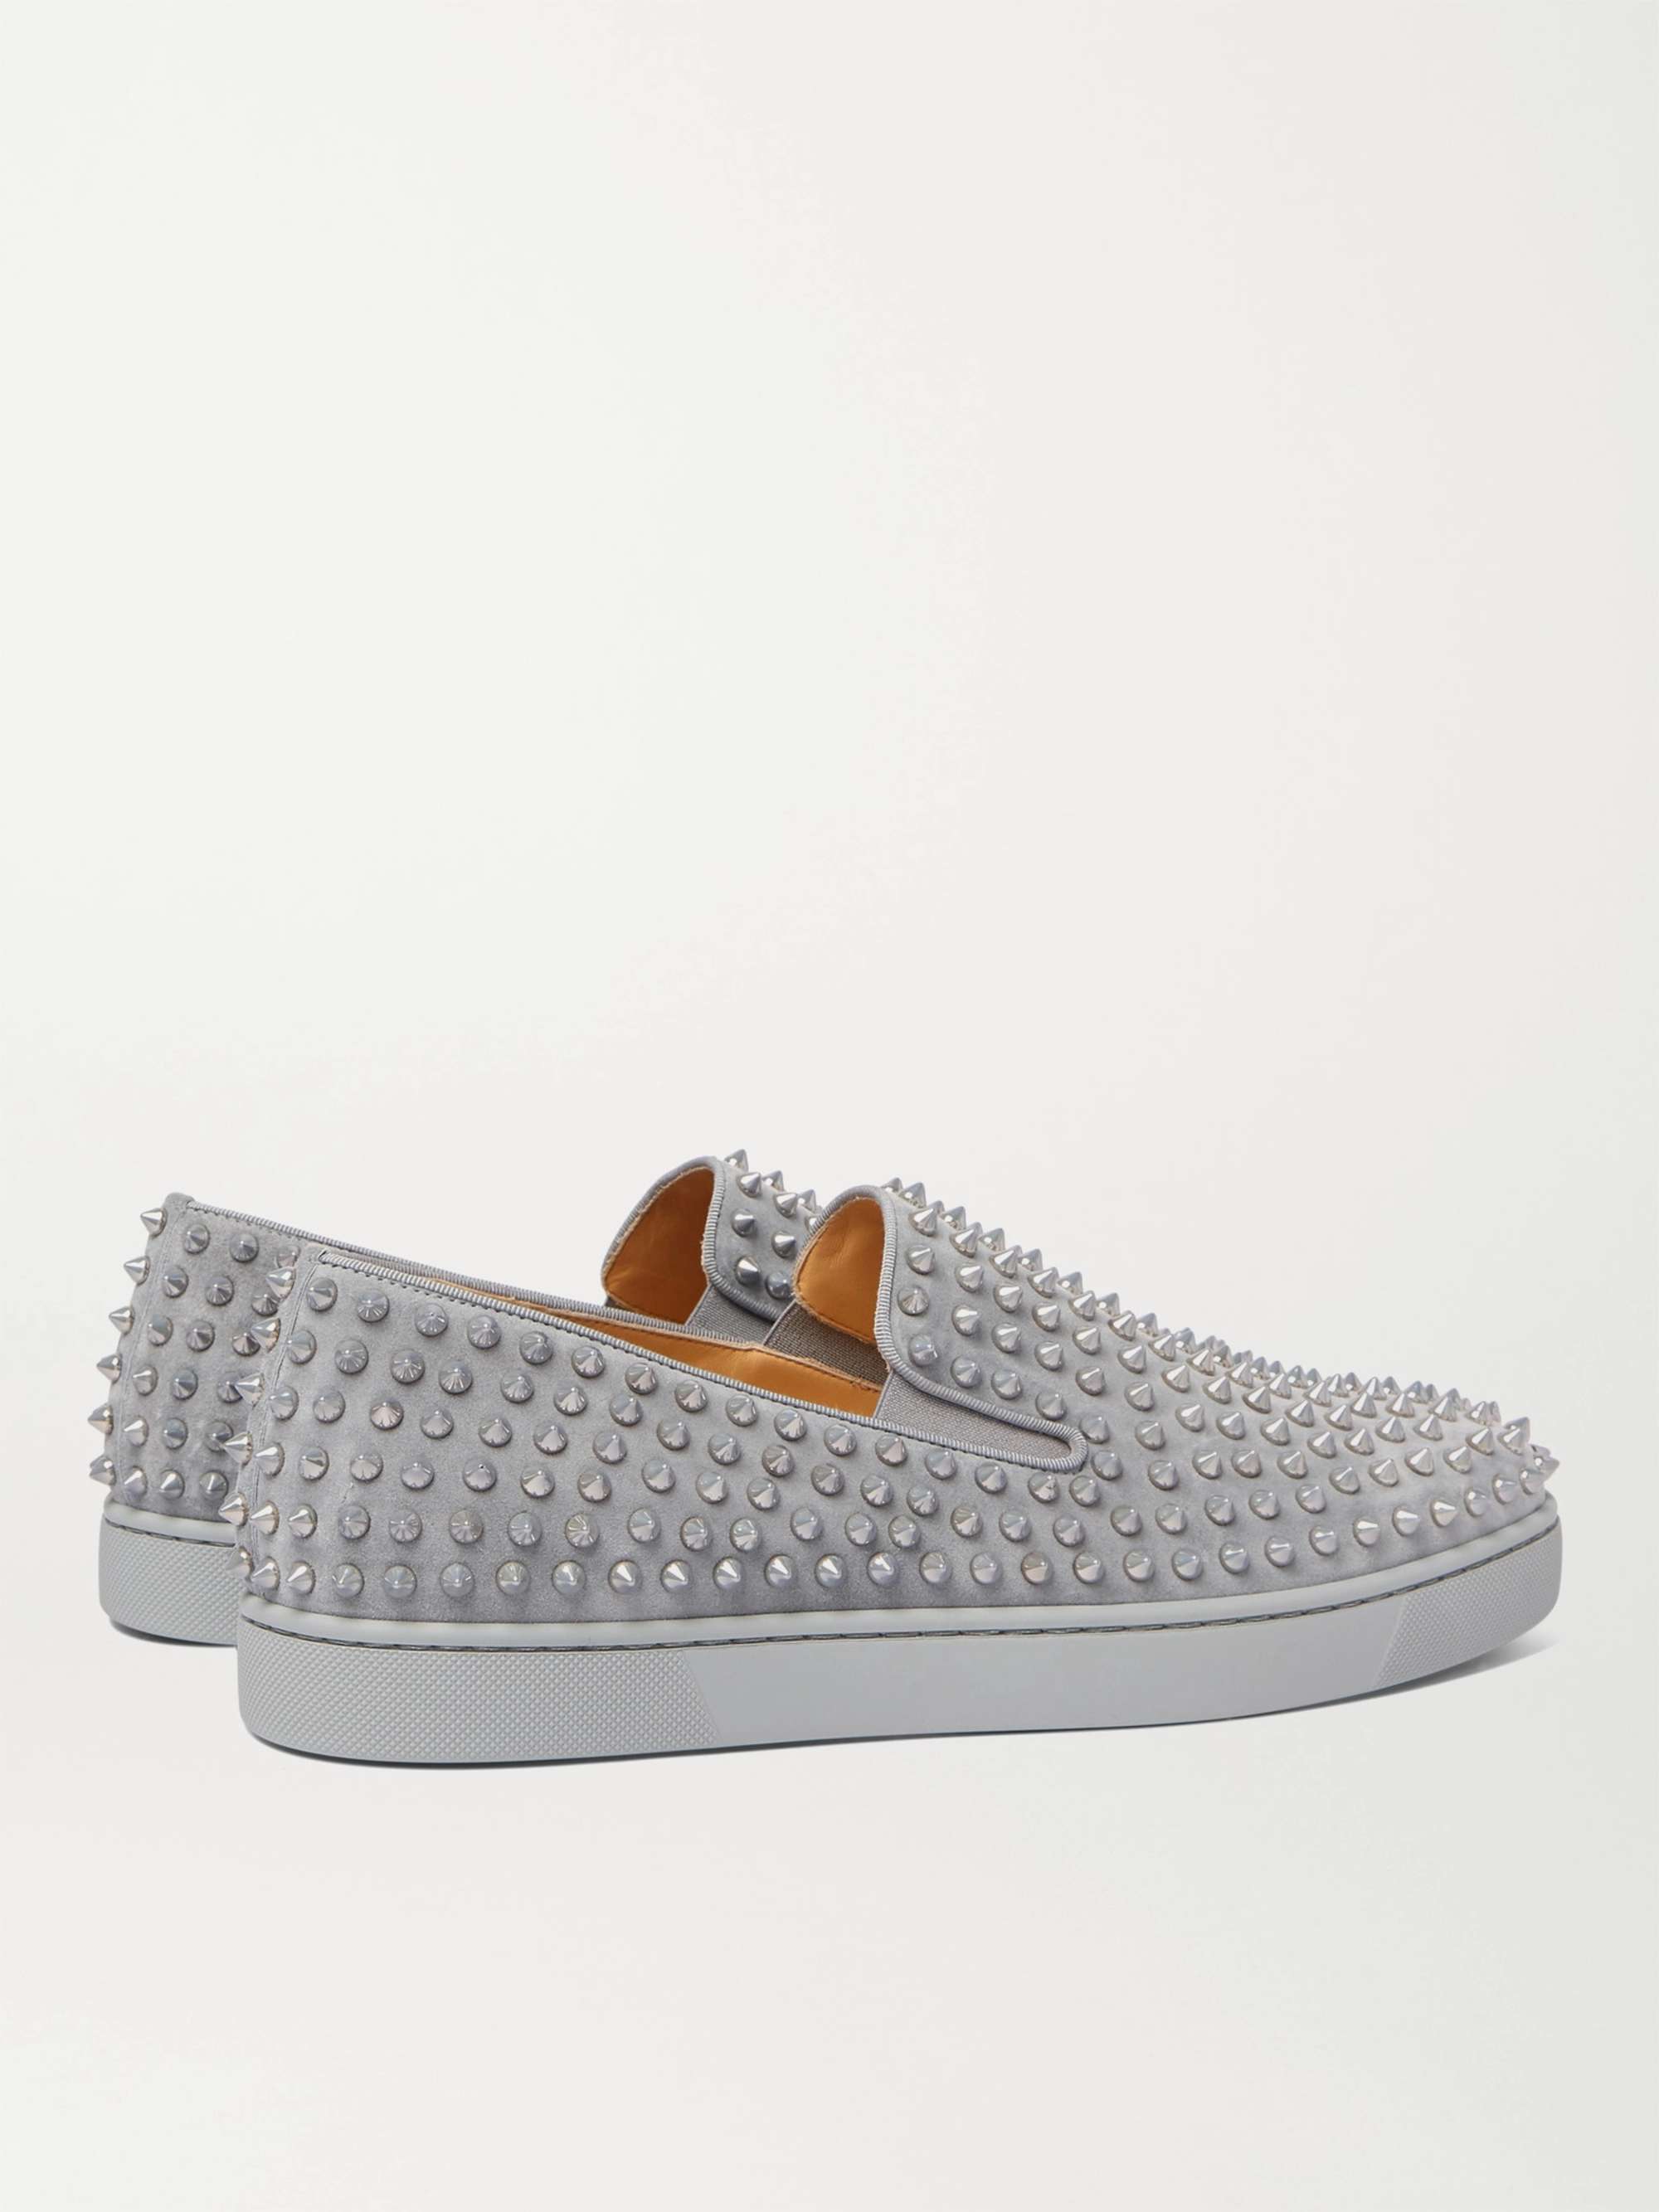 CHRISTIAN LOUBOUTIN Roller-Boat Spiked Suede Slip-On Sneakers